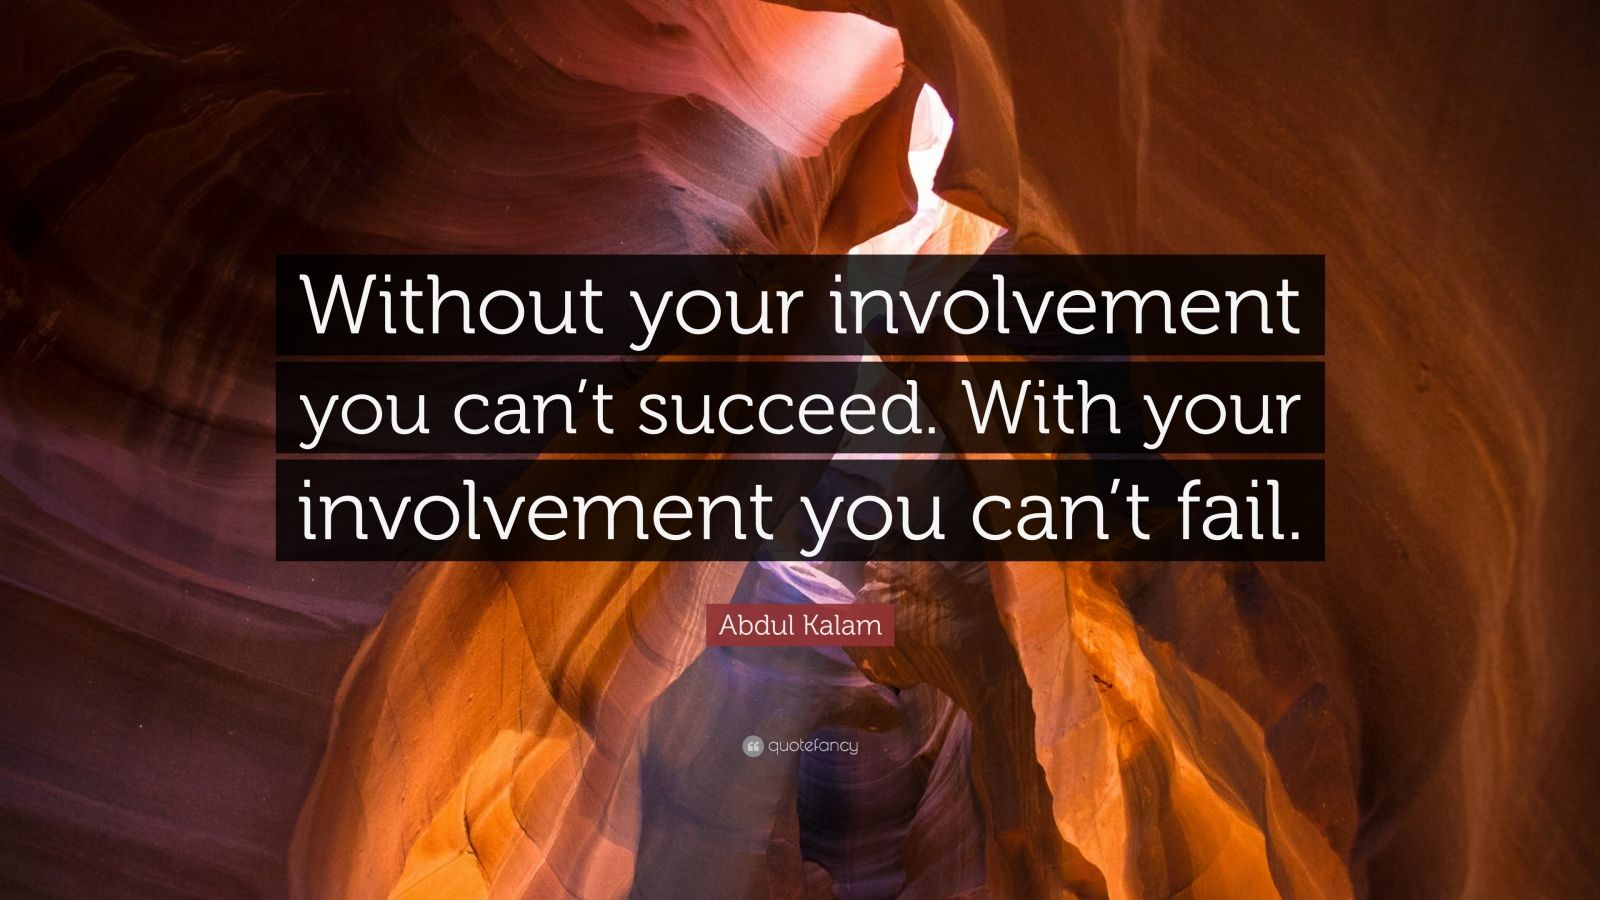 Abdul Kalam Quote: “Without your involvement you can’t succeed. With ...